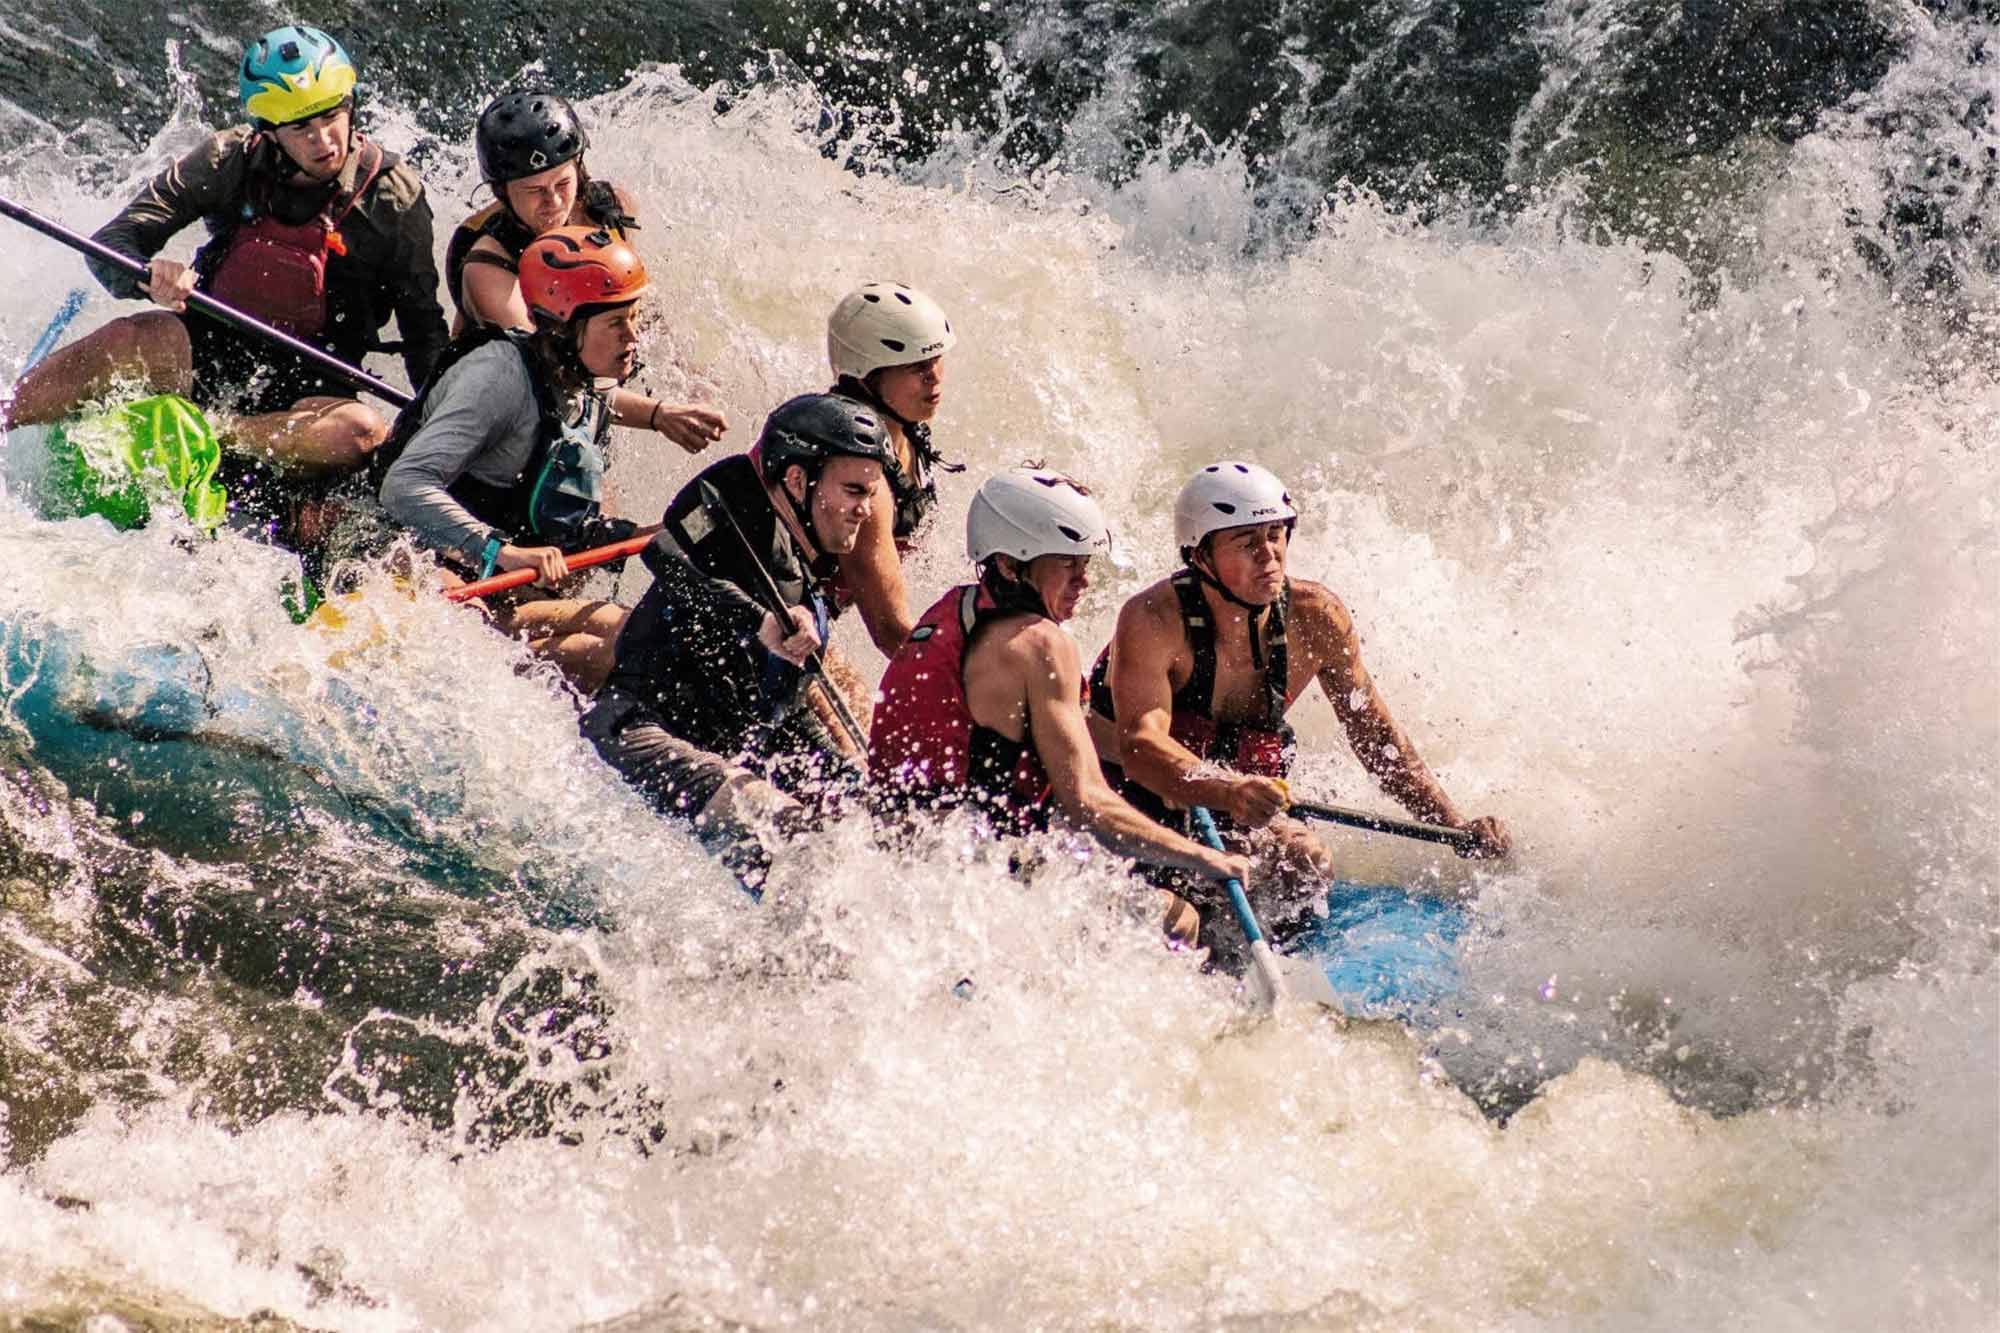 Seven students in helmets are whitewater rafting